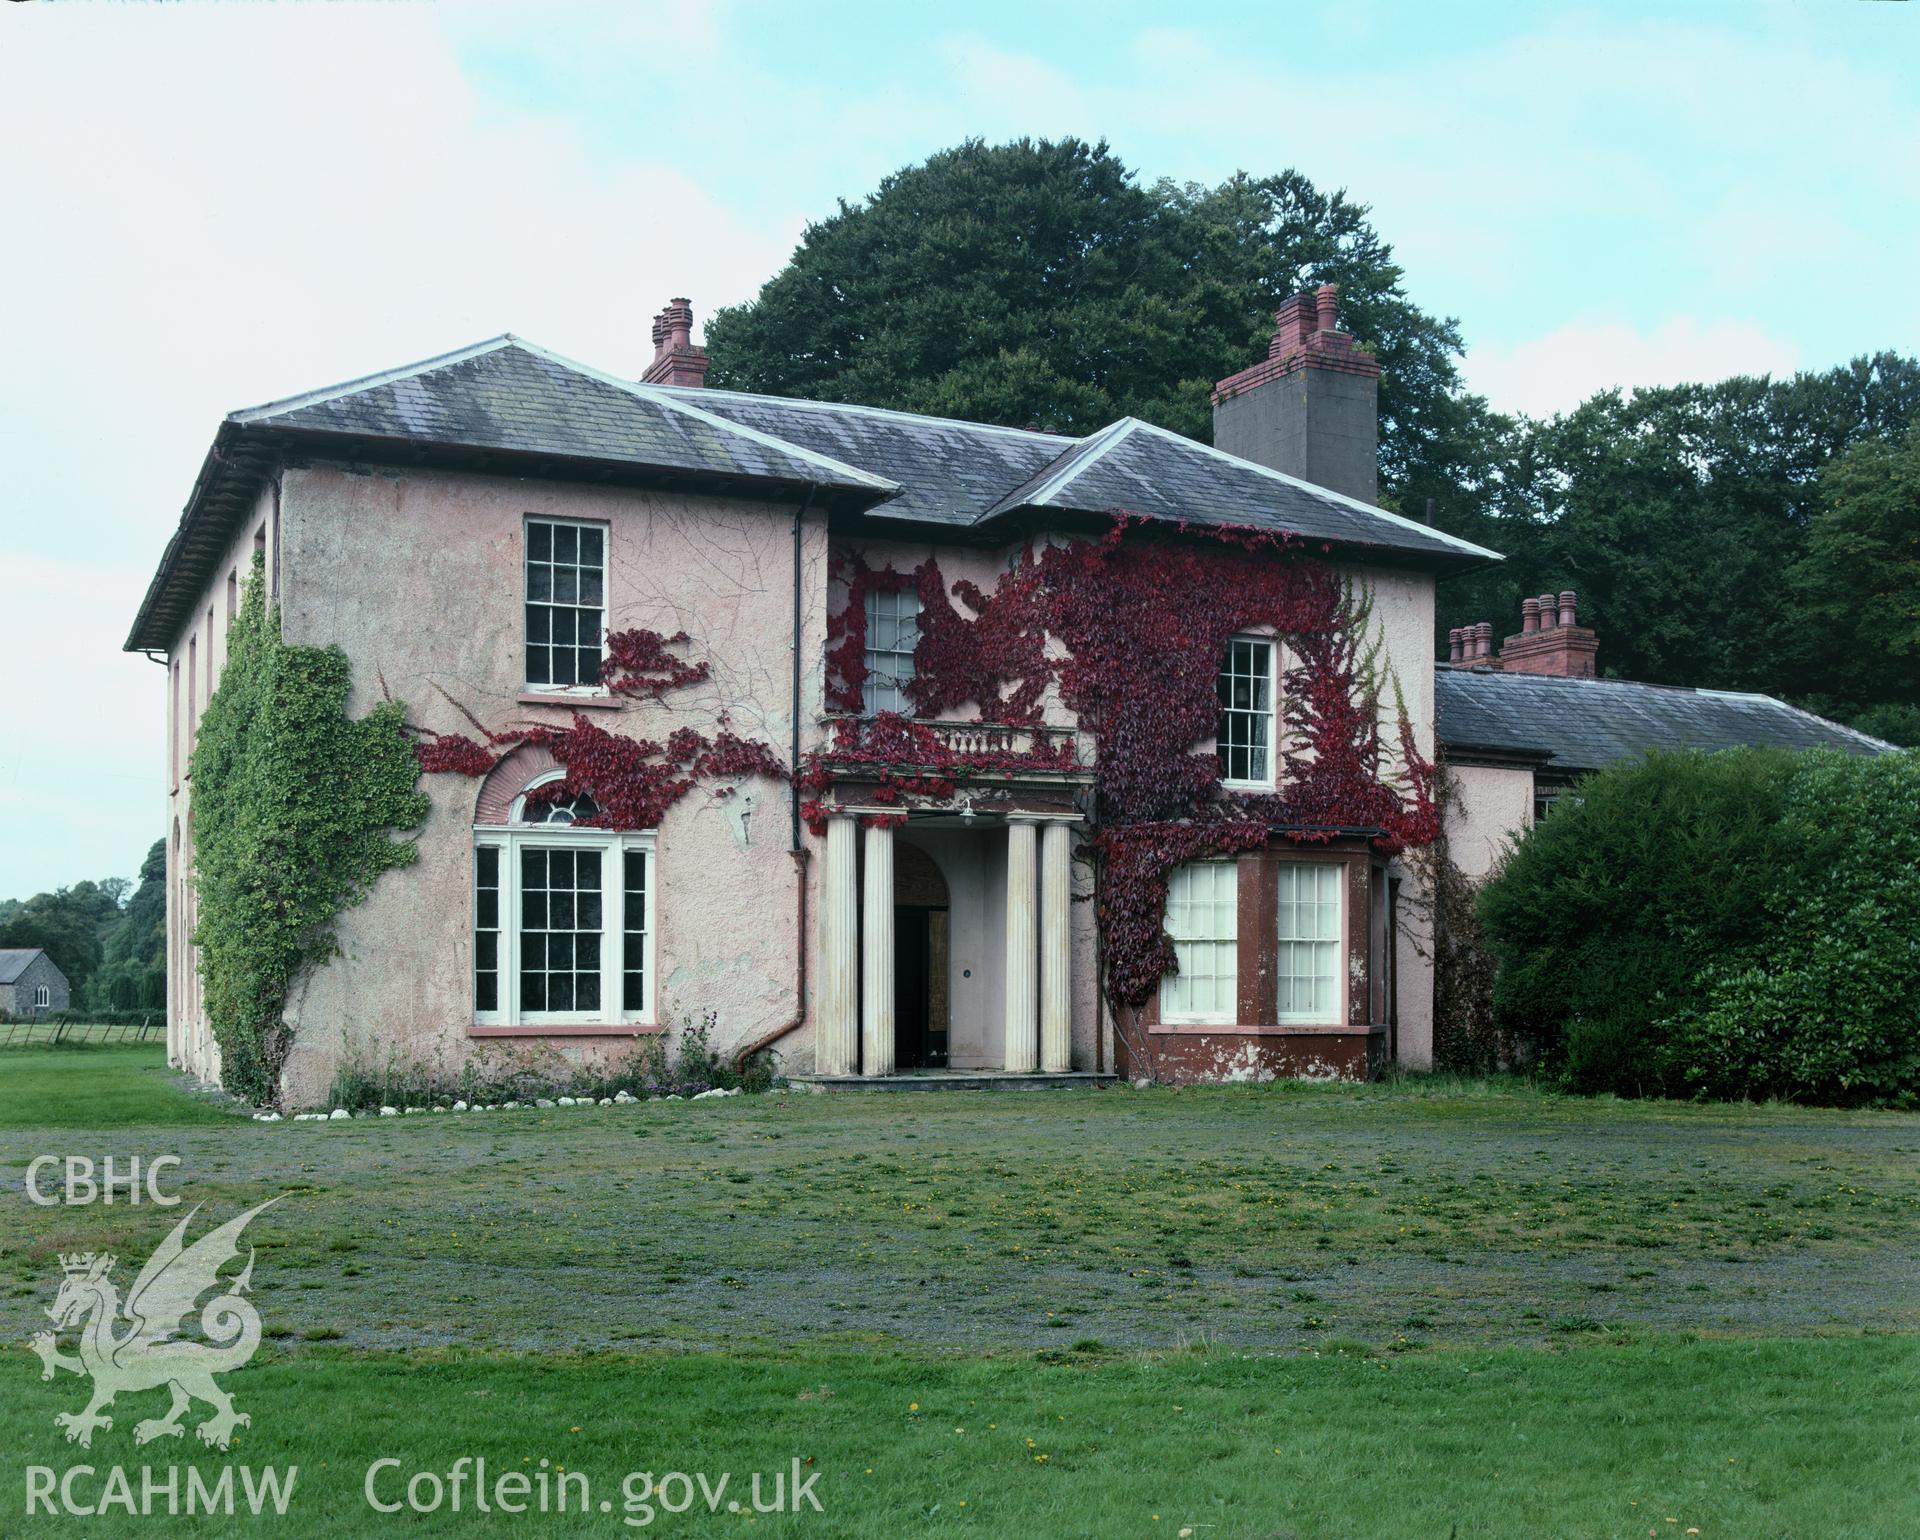 RCAHMW colour transparency showing exterior view of Llannerchaeron House, taken by Iain Wright, c.1997